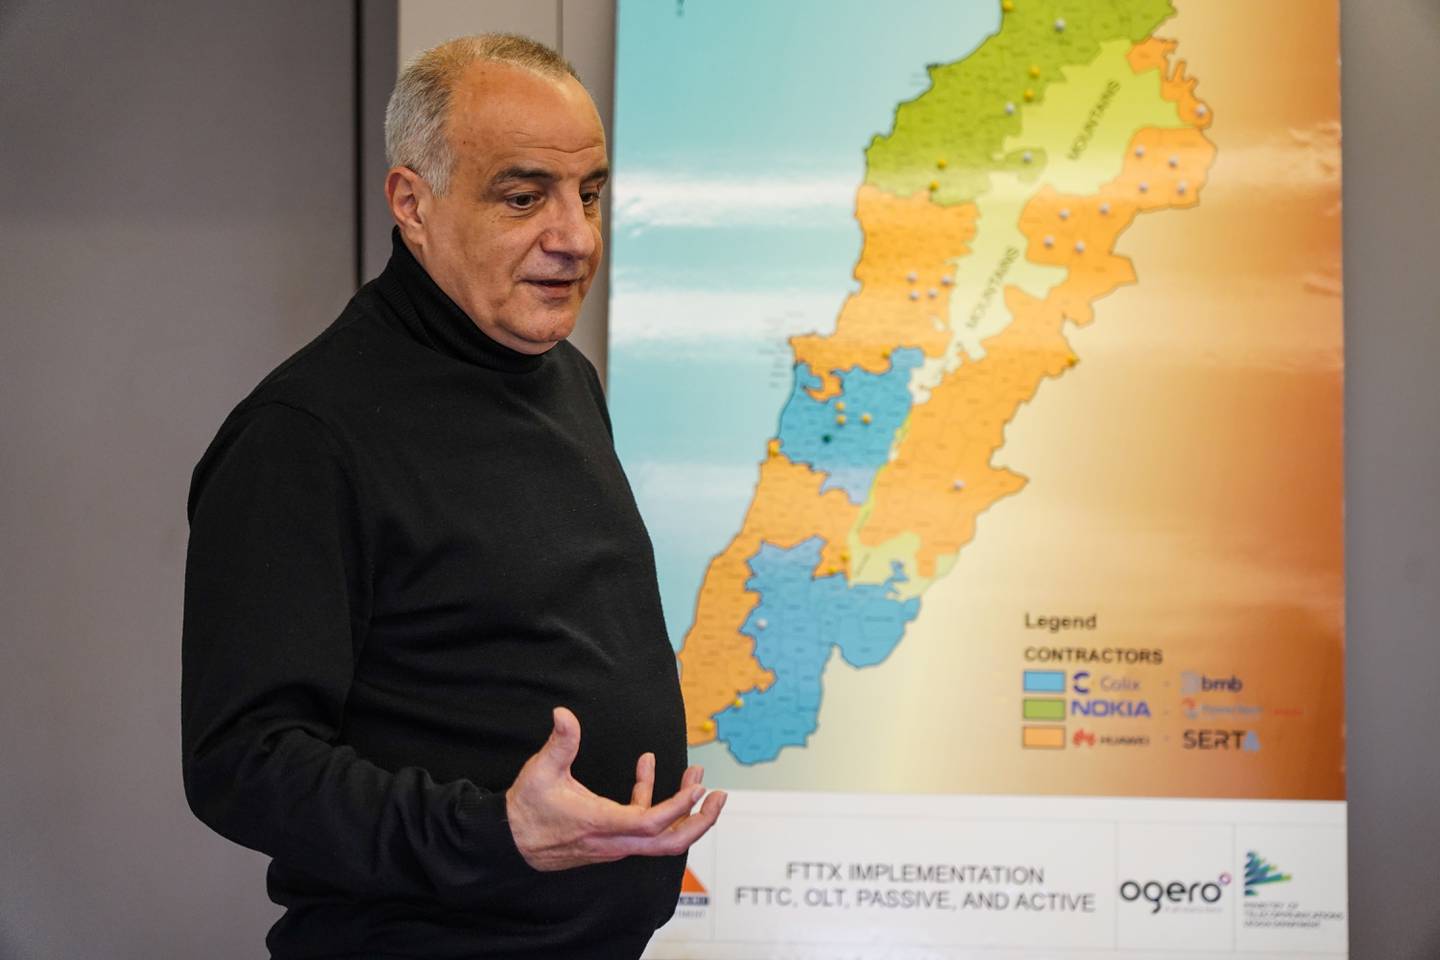 Ogero chairman Imad Kreidieh says thieves are cutting cables into small pieces and then loading them into a van for sale. Finbar Anderson / The National